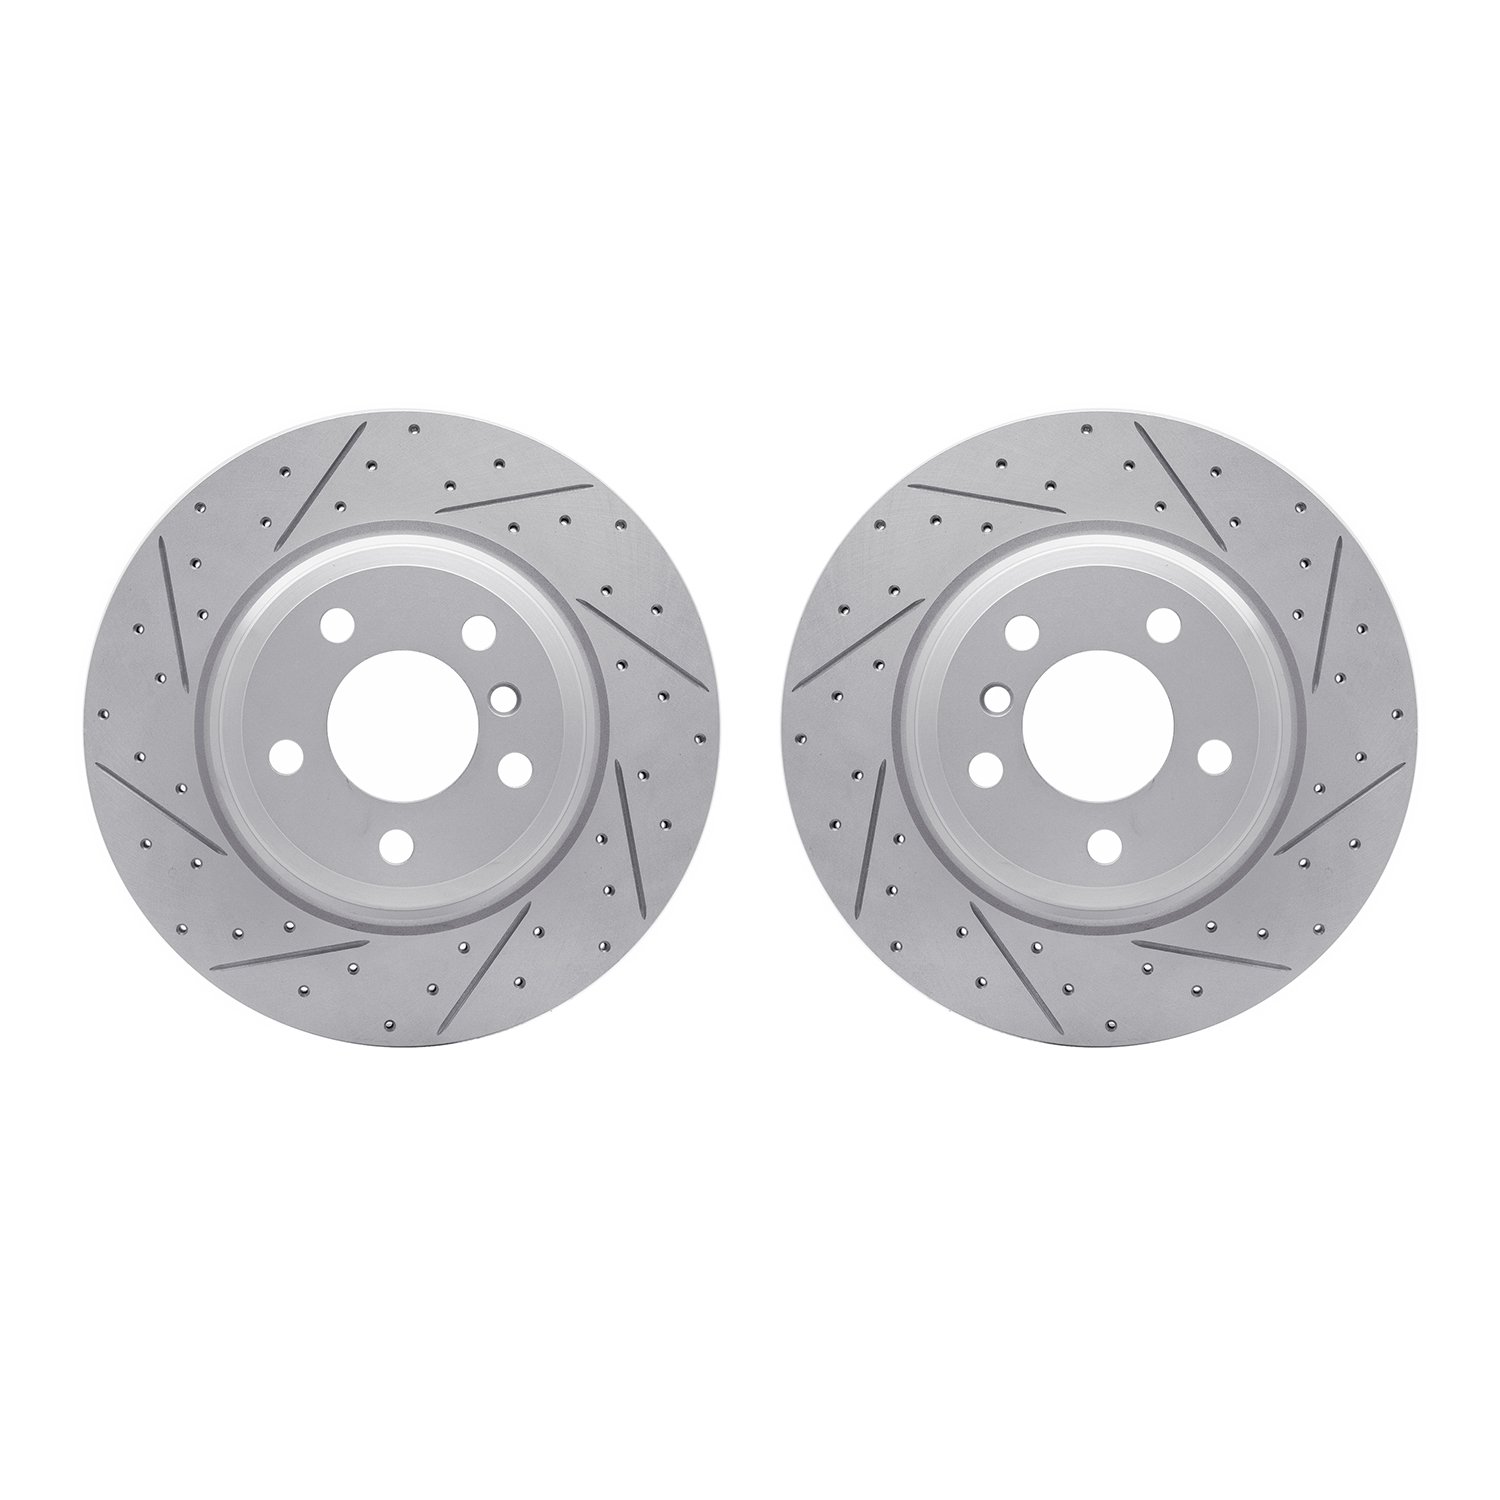 2002-31069 Geoperformance Drilled/Slotted Brake Rotors, 2012-2020 BMW, Position: Rear